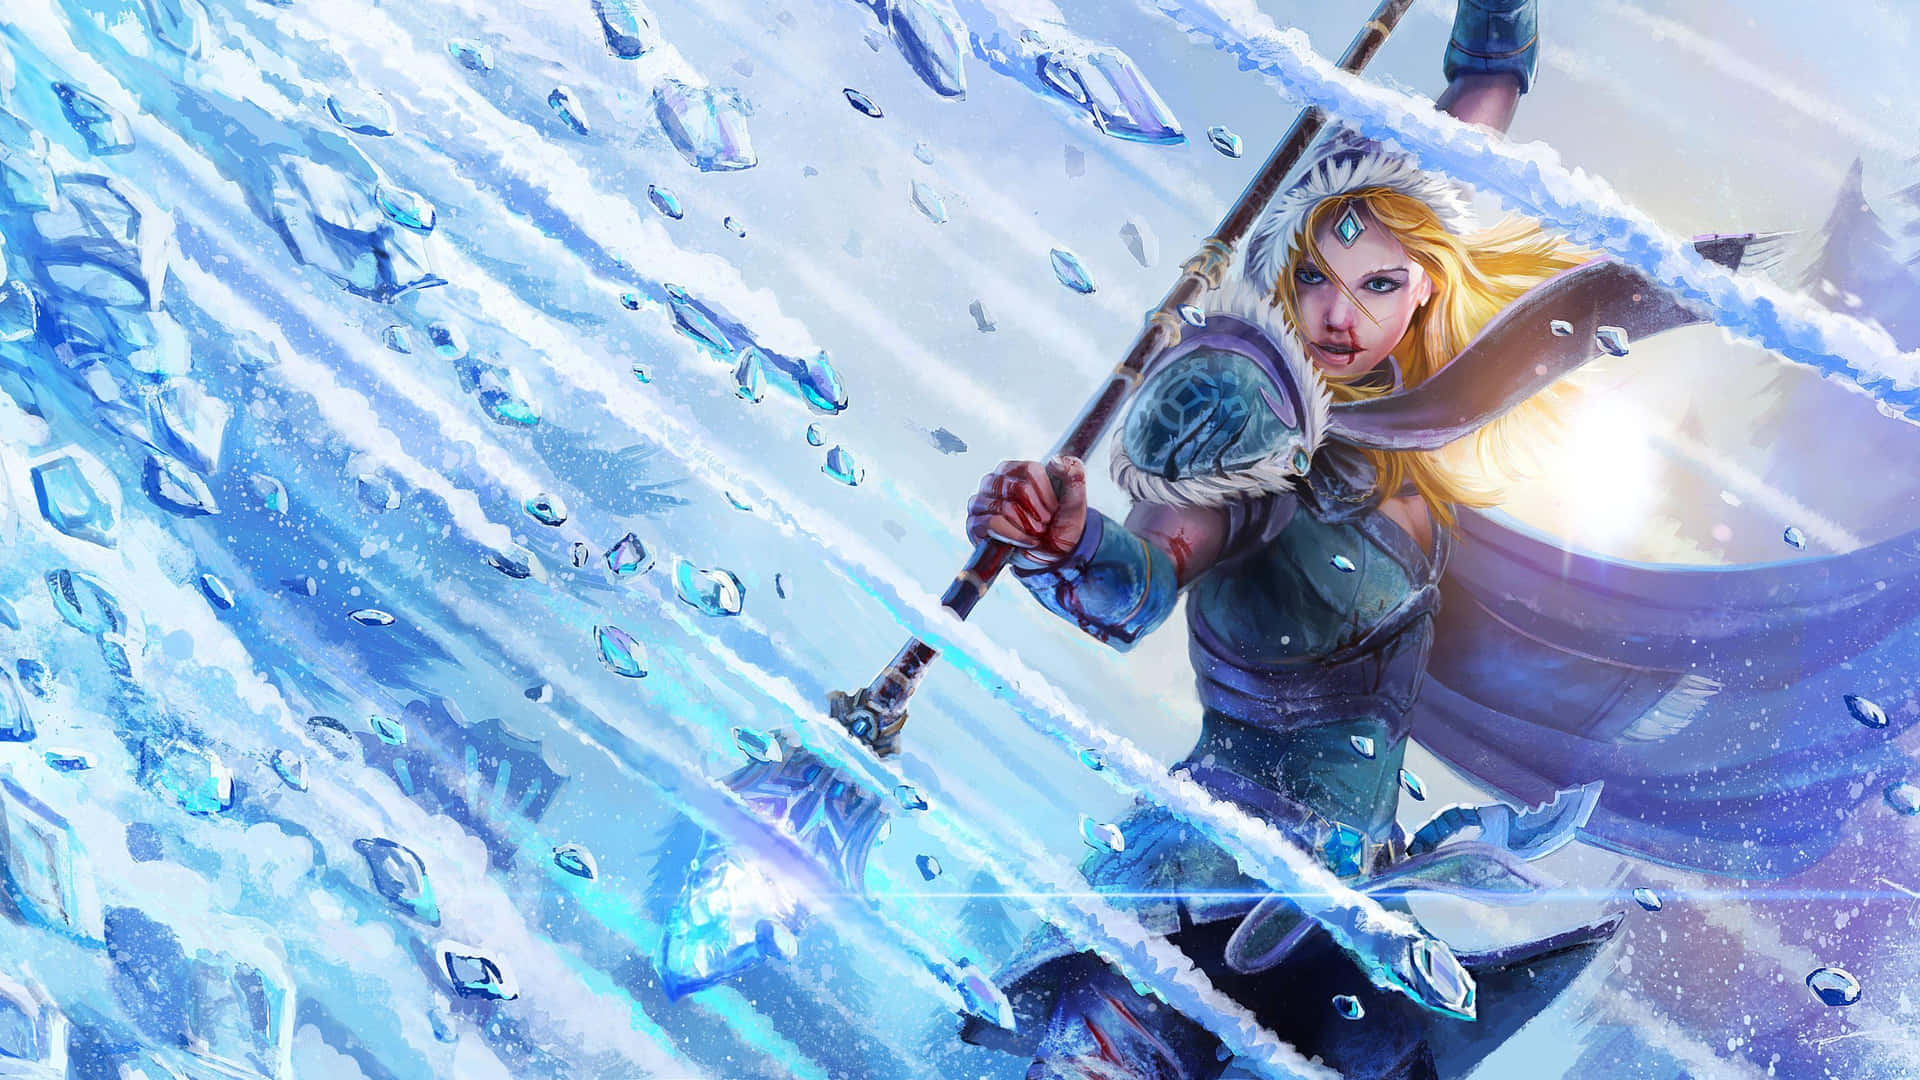 Crystal Maiden - The Ice Sorceress of Dota 2 Wallpaper